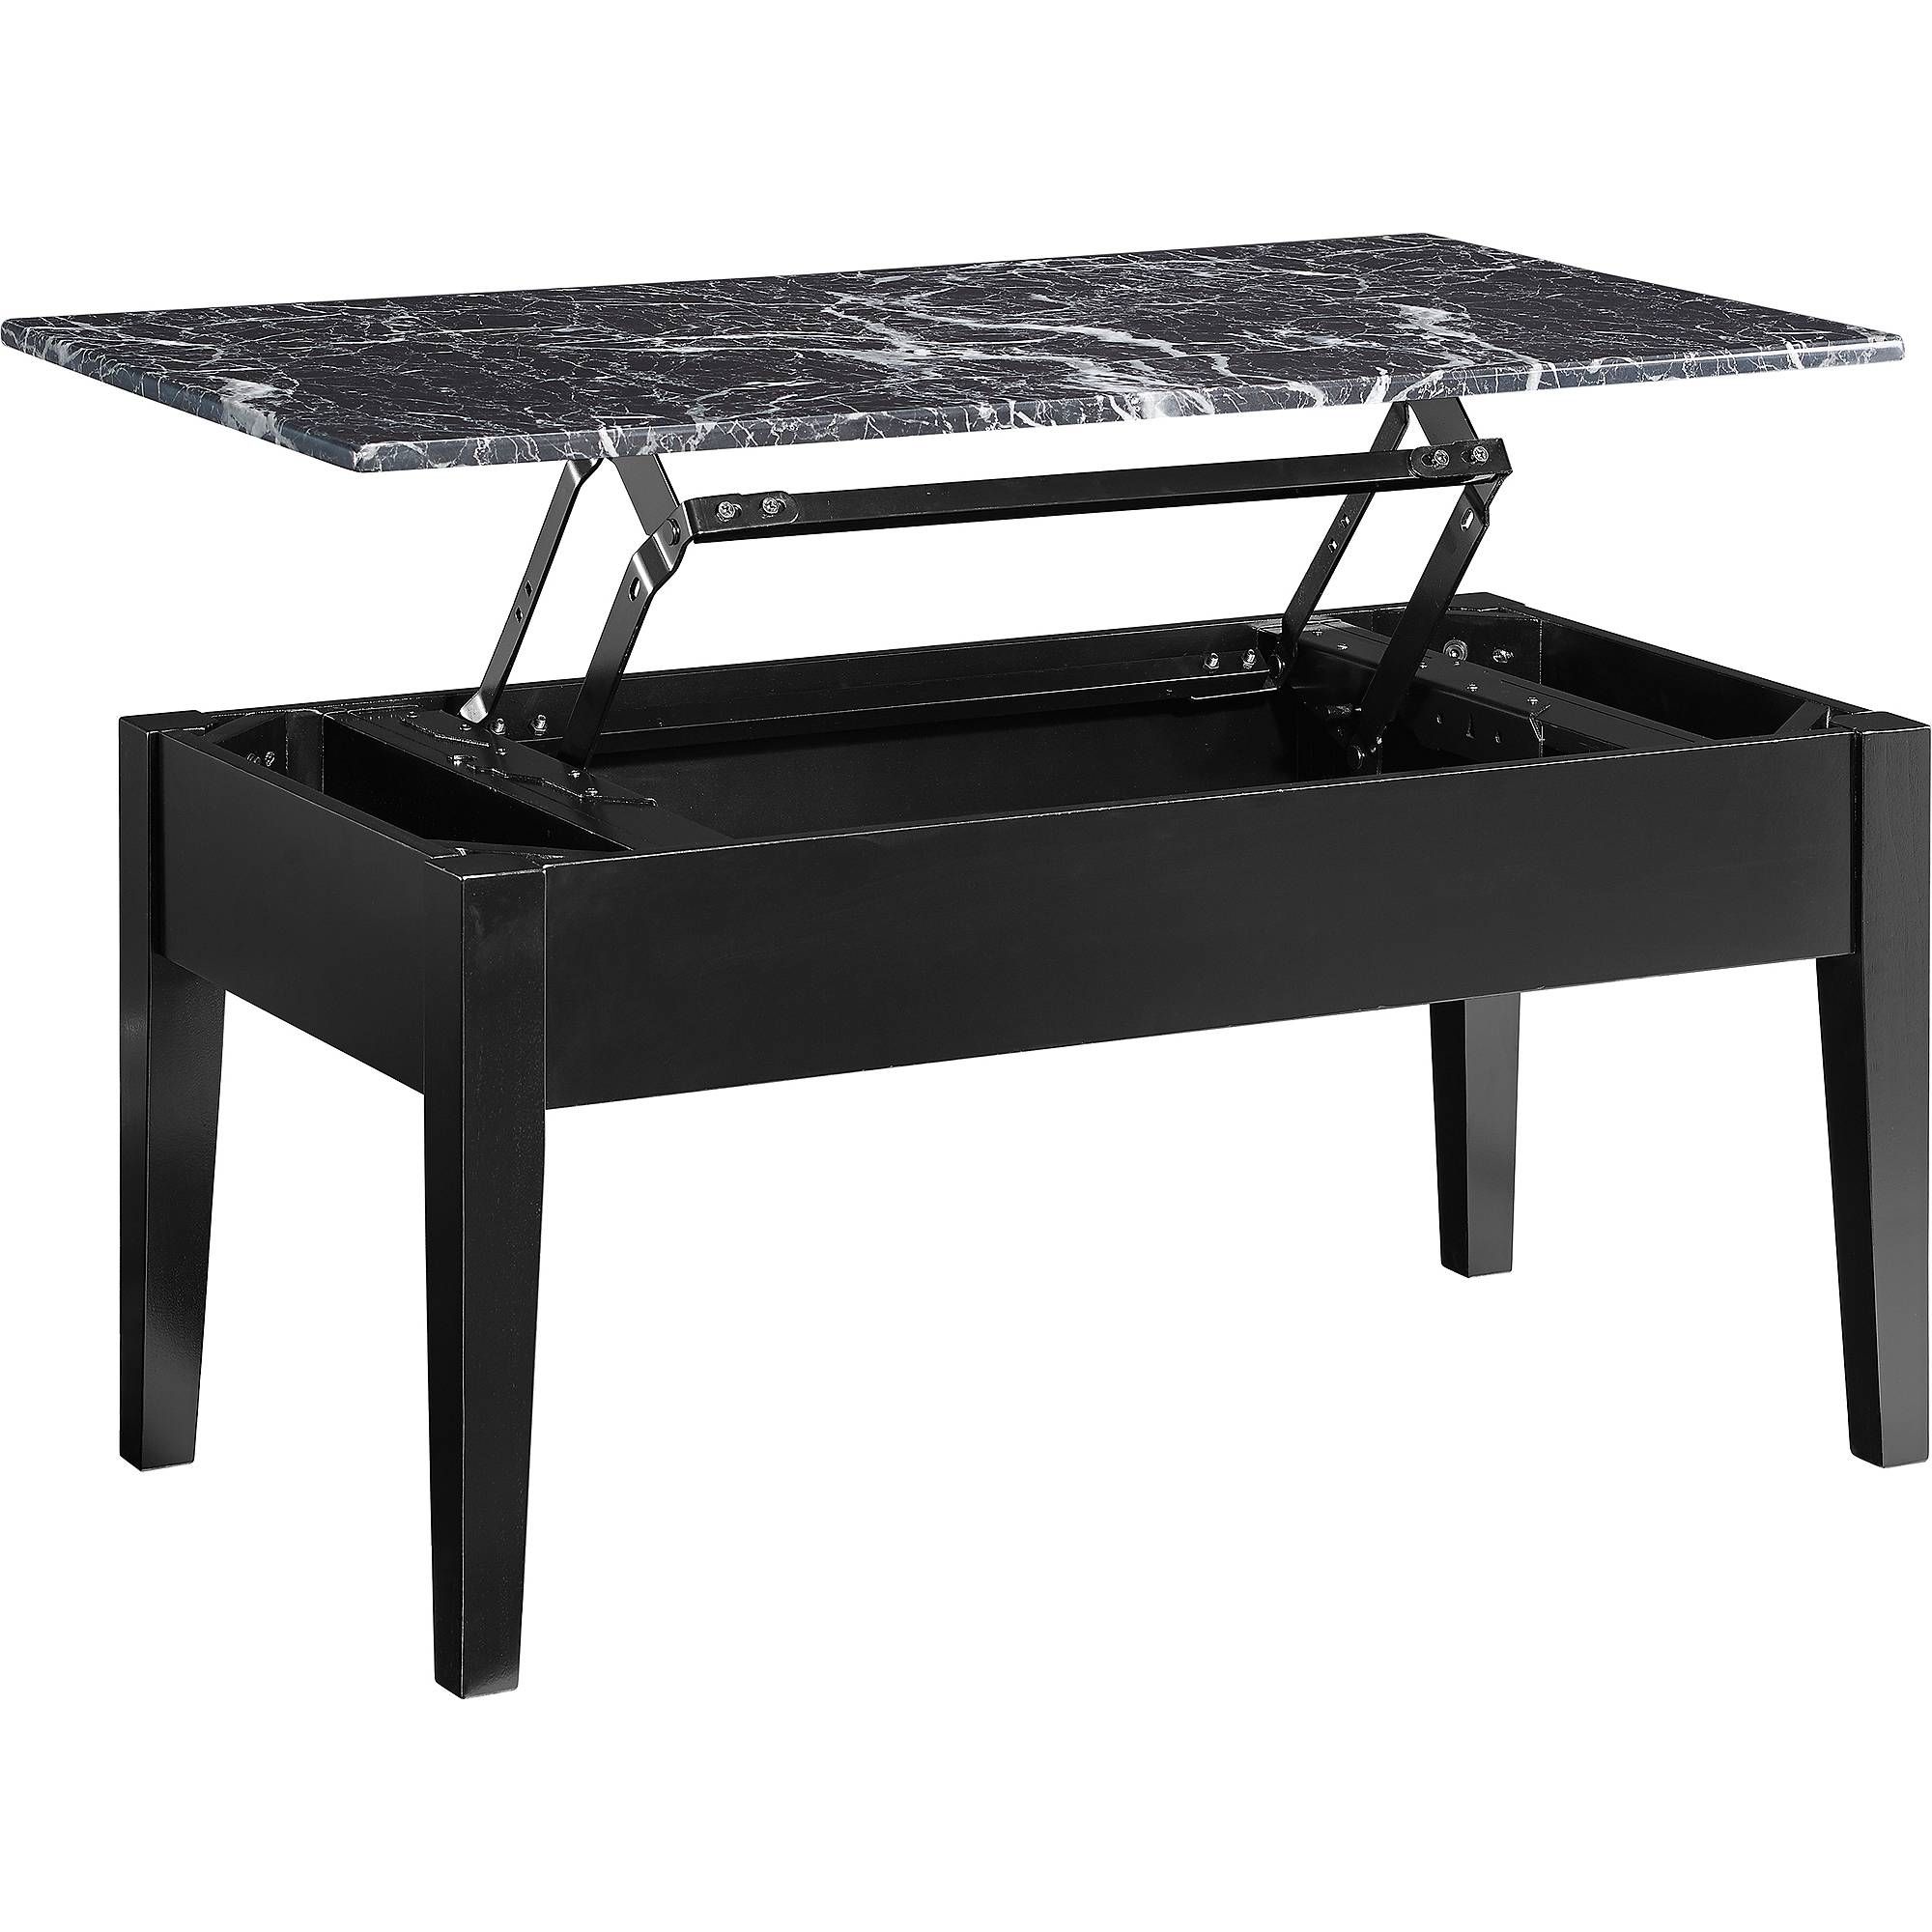 Dorel Living Faux Marble Lift Top Coffee Table – Walmart With Regard To Coffee Tables With Lift Top Storage (View 13 of 30)